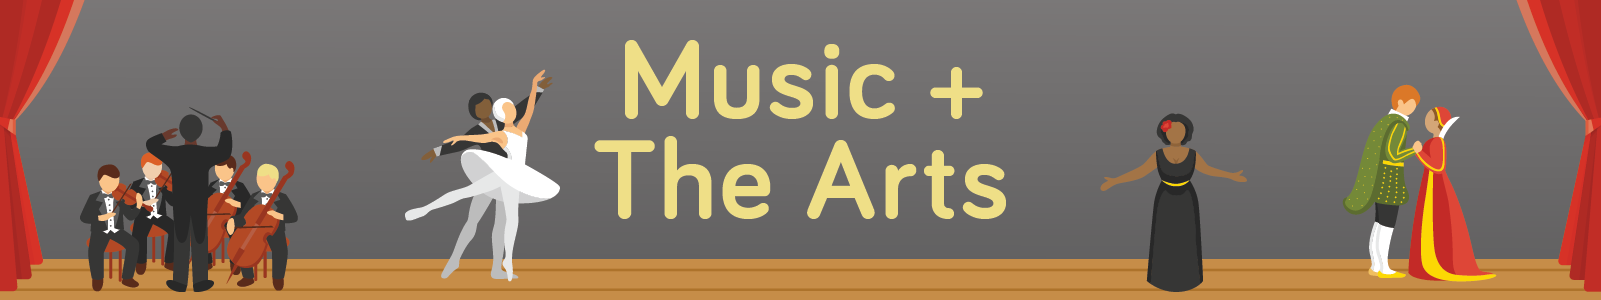 Music and the Arts graphic banner